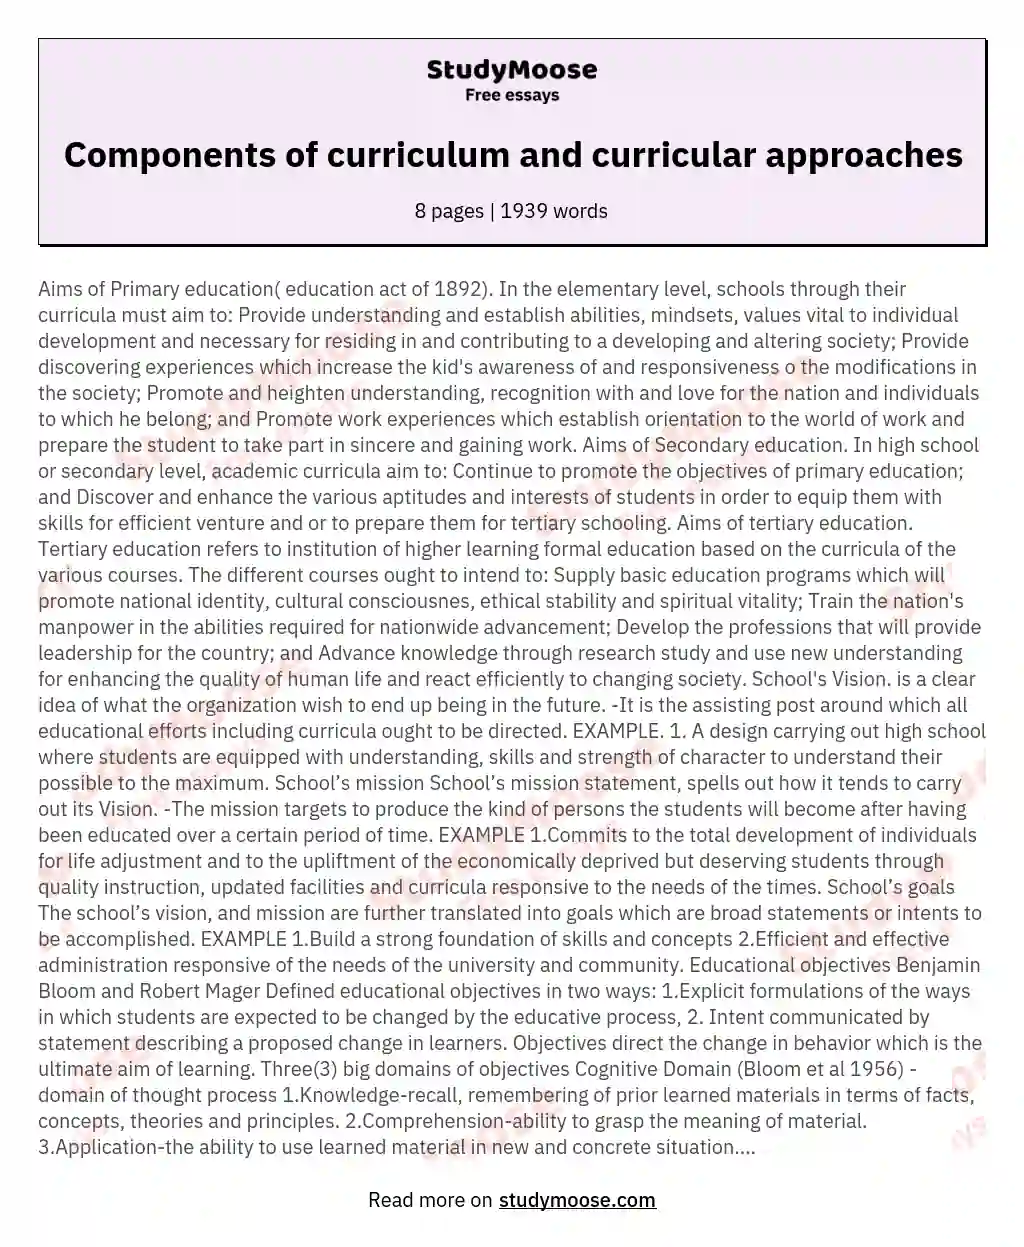 Components of curriculum and curricular approaches essay